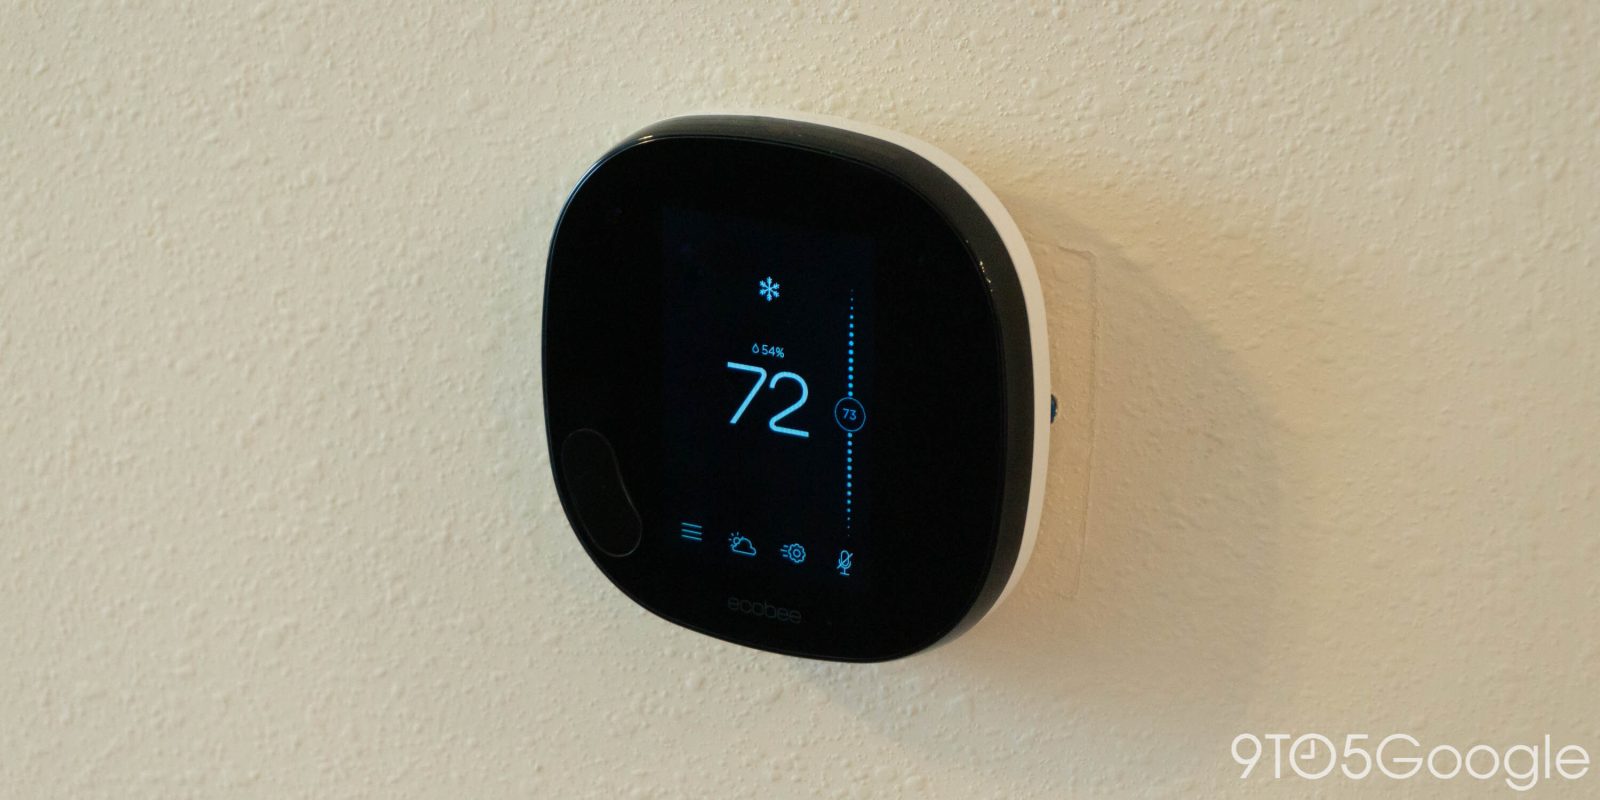 https://9to5google.com/wp-content/uploads/sites/4/2021/04/ecobee-smart-thermostat.jpg?quality=82&strip=all&w=1600